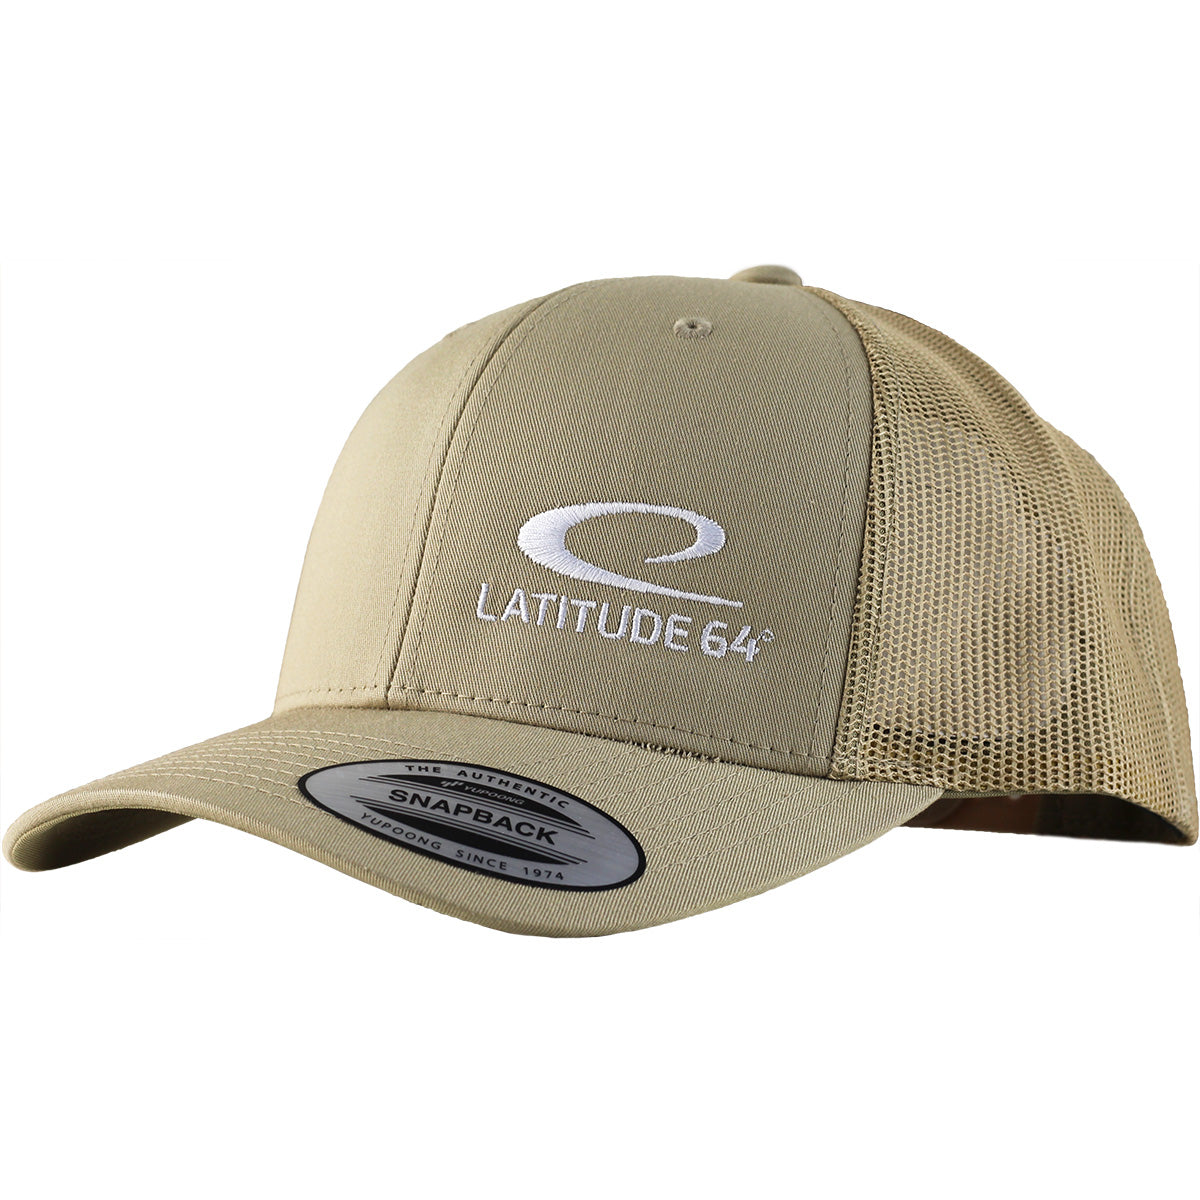 What makes the Flexfit trucker hat different?